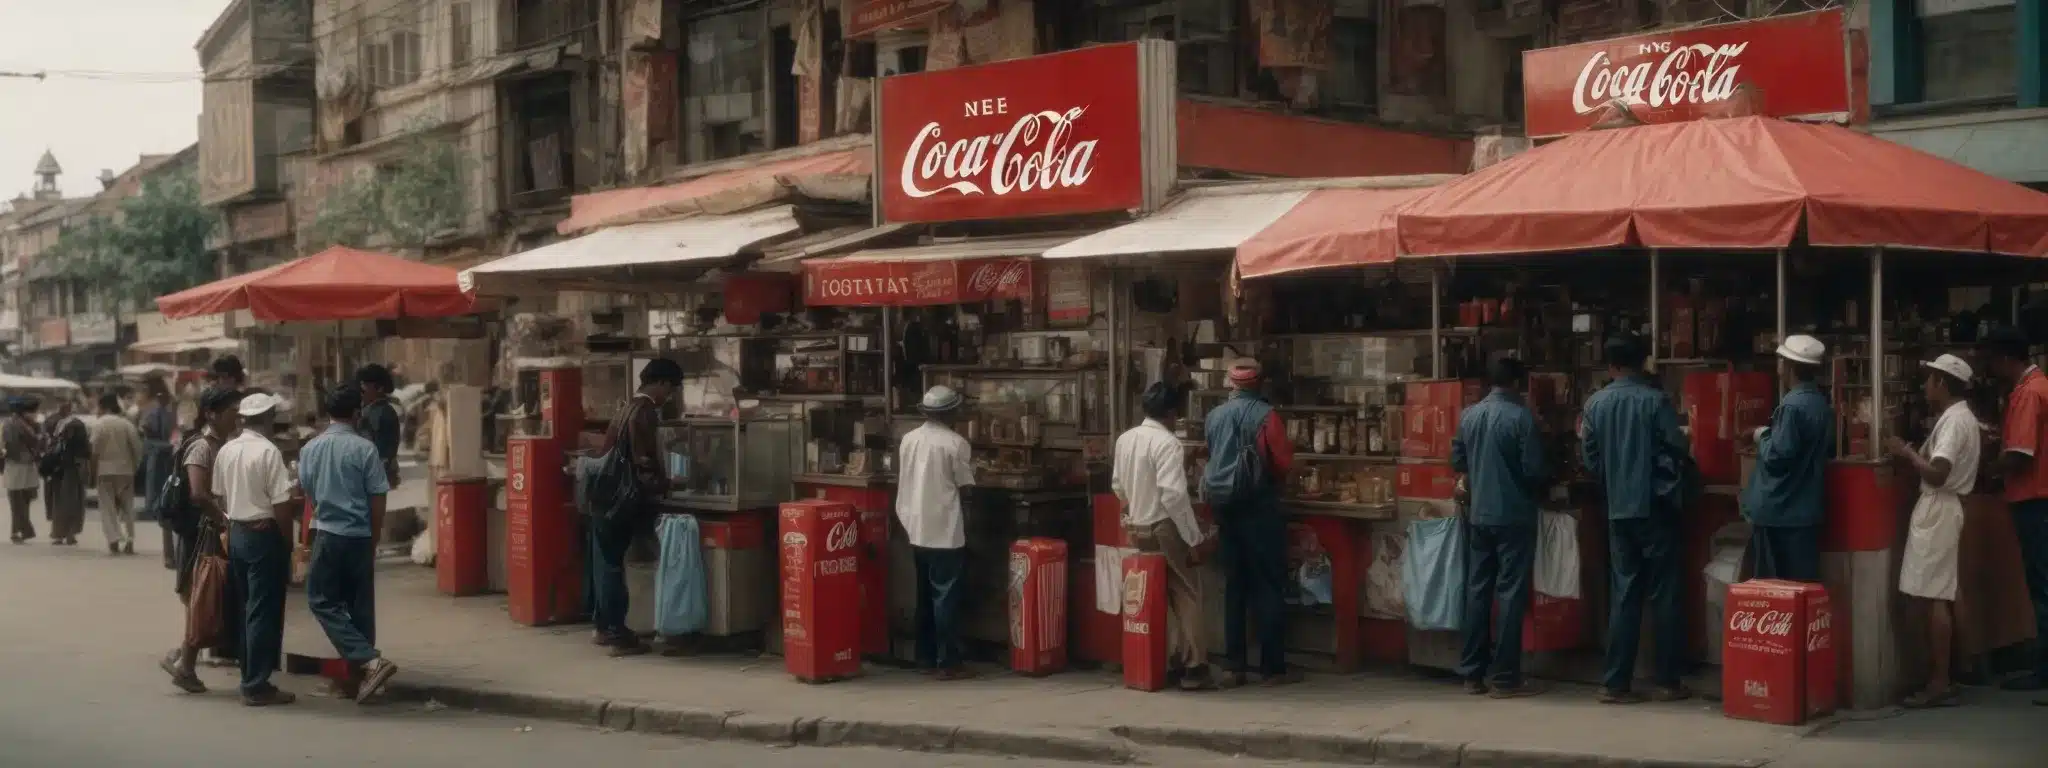 A Bustling Street Corner Kiosk Brimming With Ice-Cold Bottles Of Coca-Cola, Inviting A Diverse Crowd To Refresh And Connect.